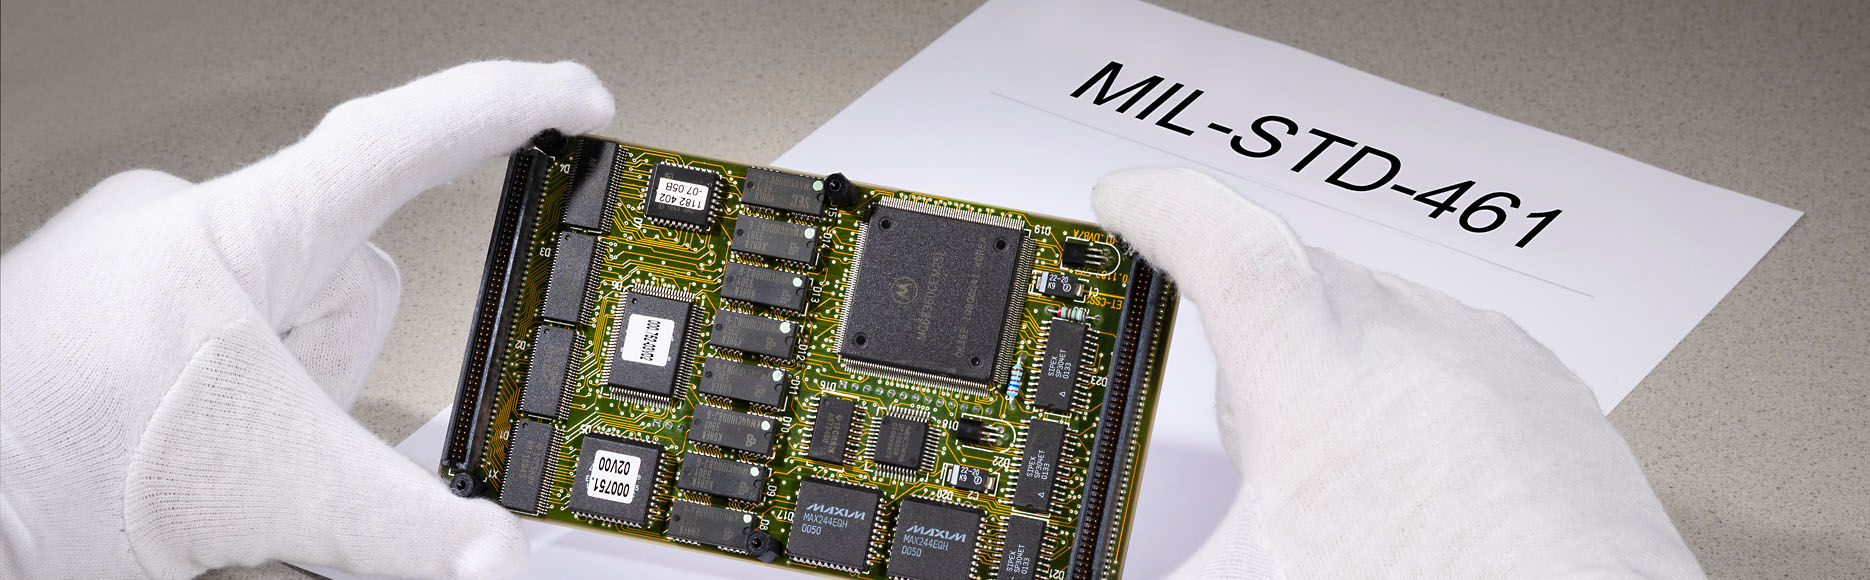 Person wearing gloves holding circuit board in hand. “MIL-STD-461” can be read printed on a document